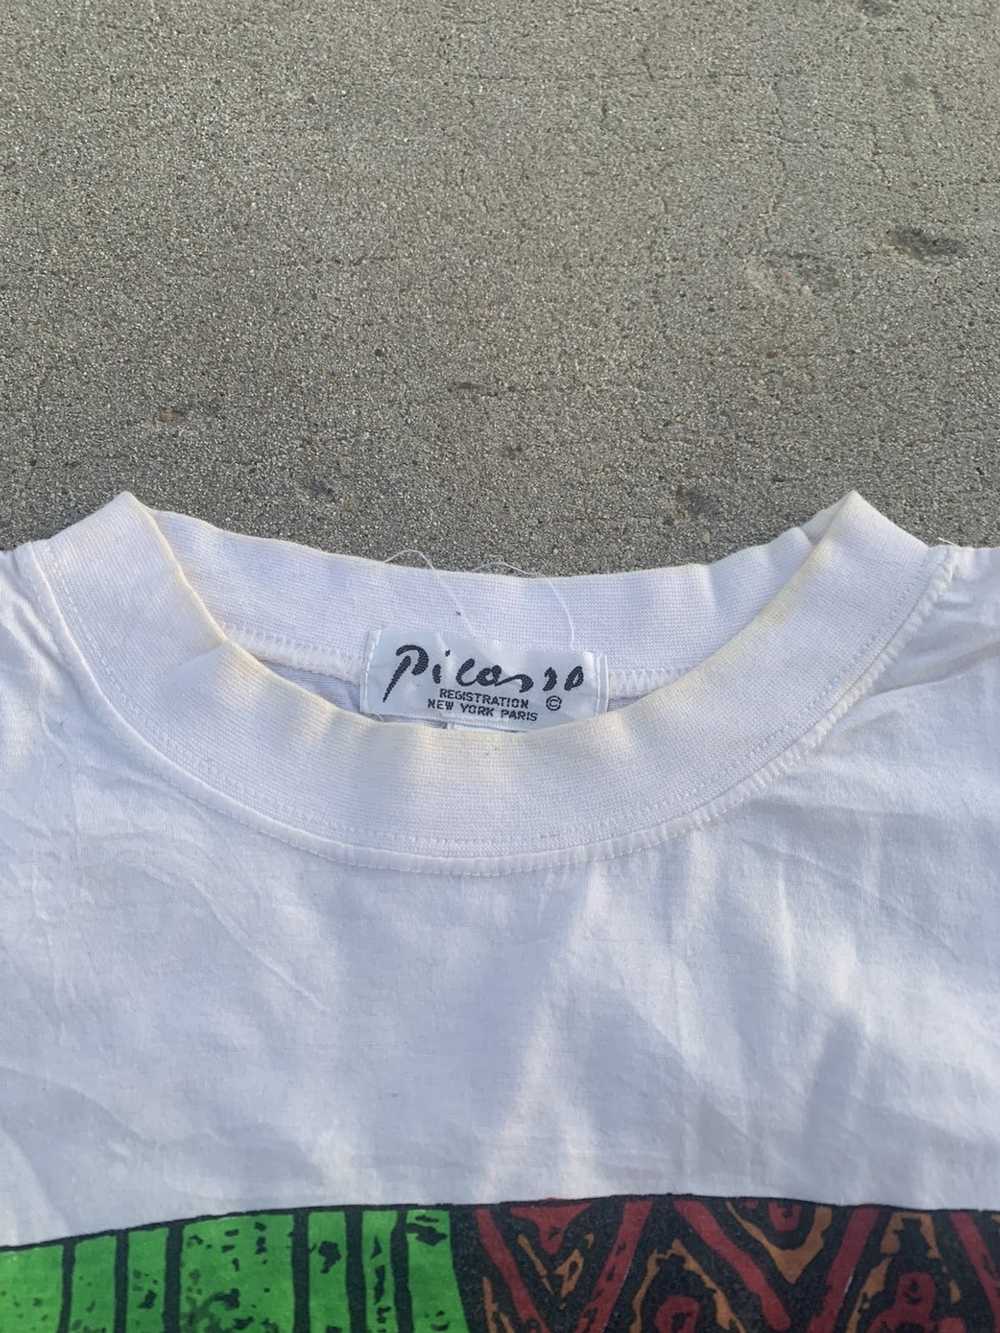 Vintage Extremely Rare Pablo Picasso Shirt - image 3